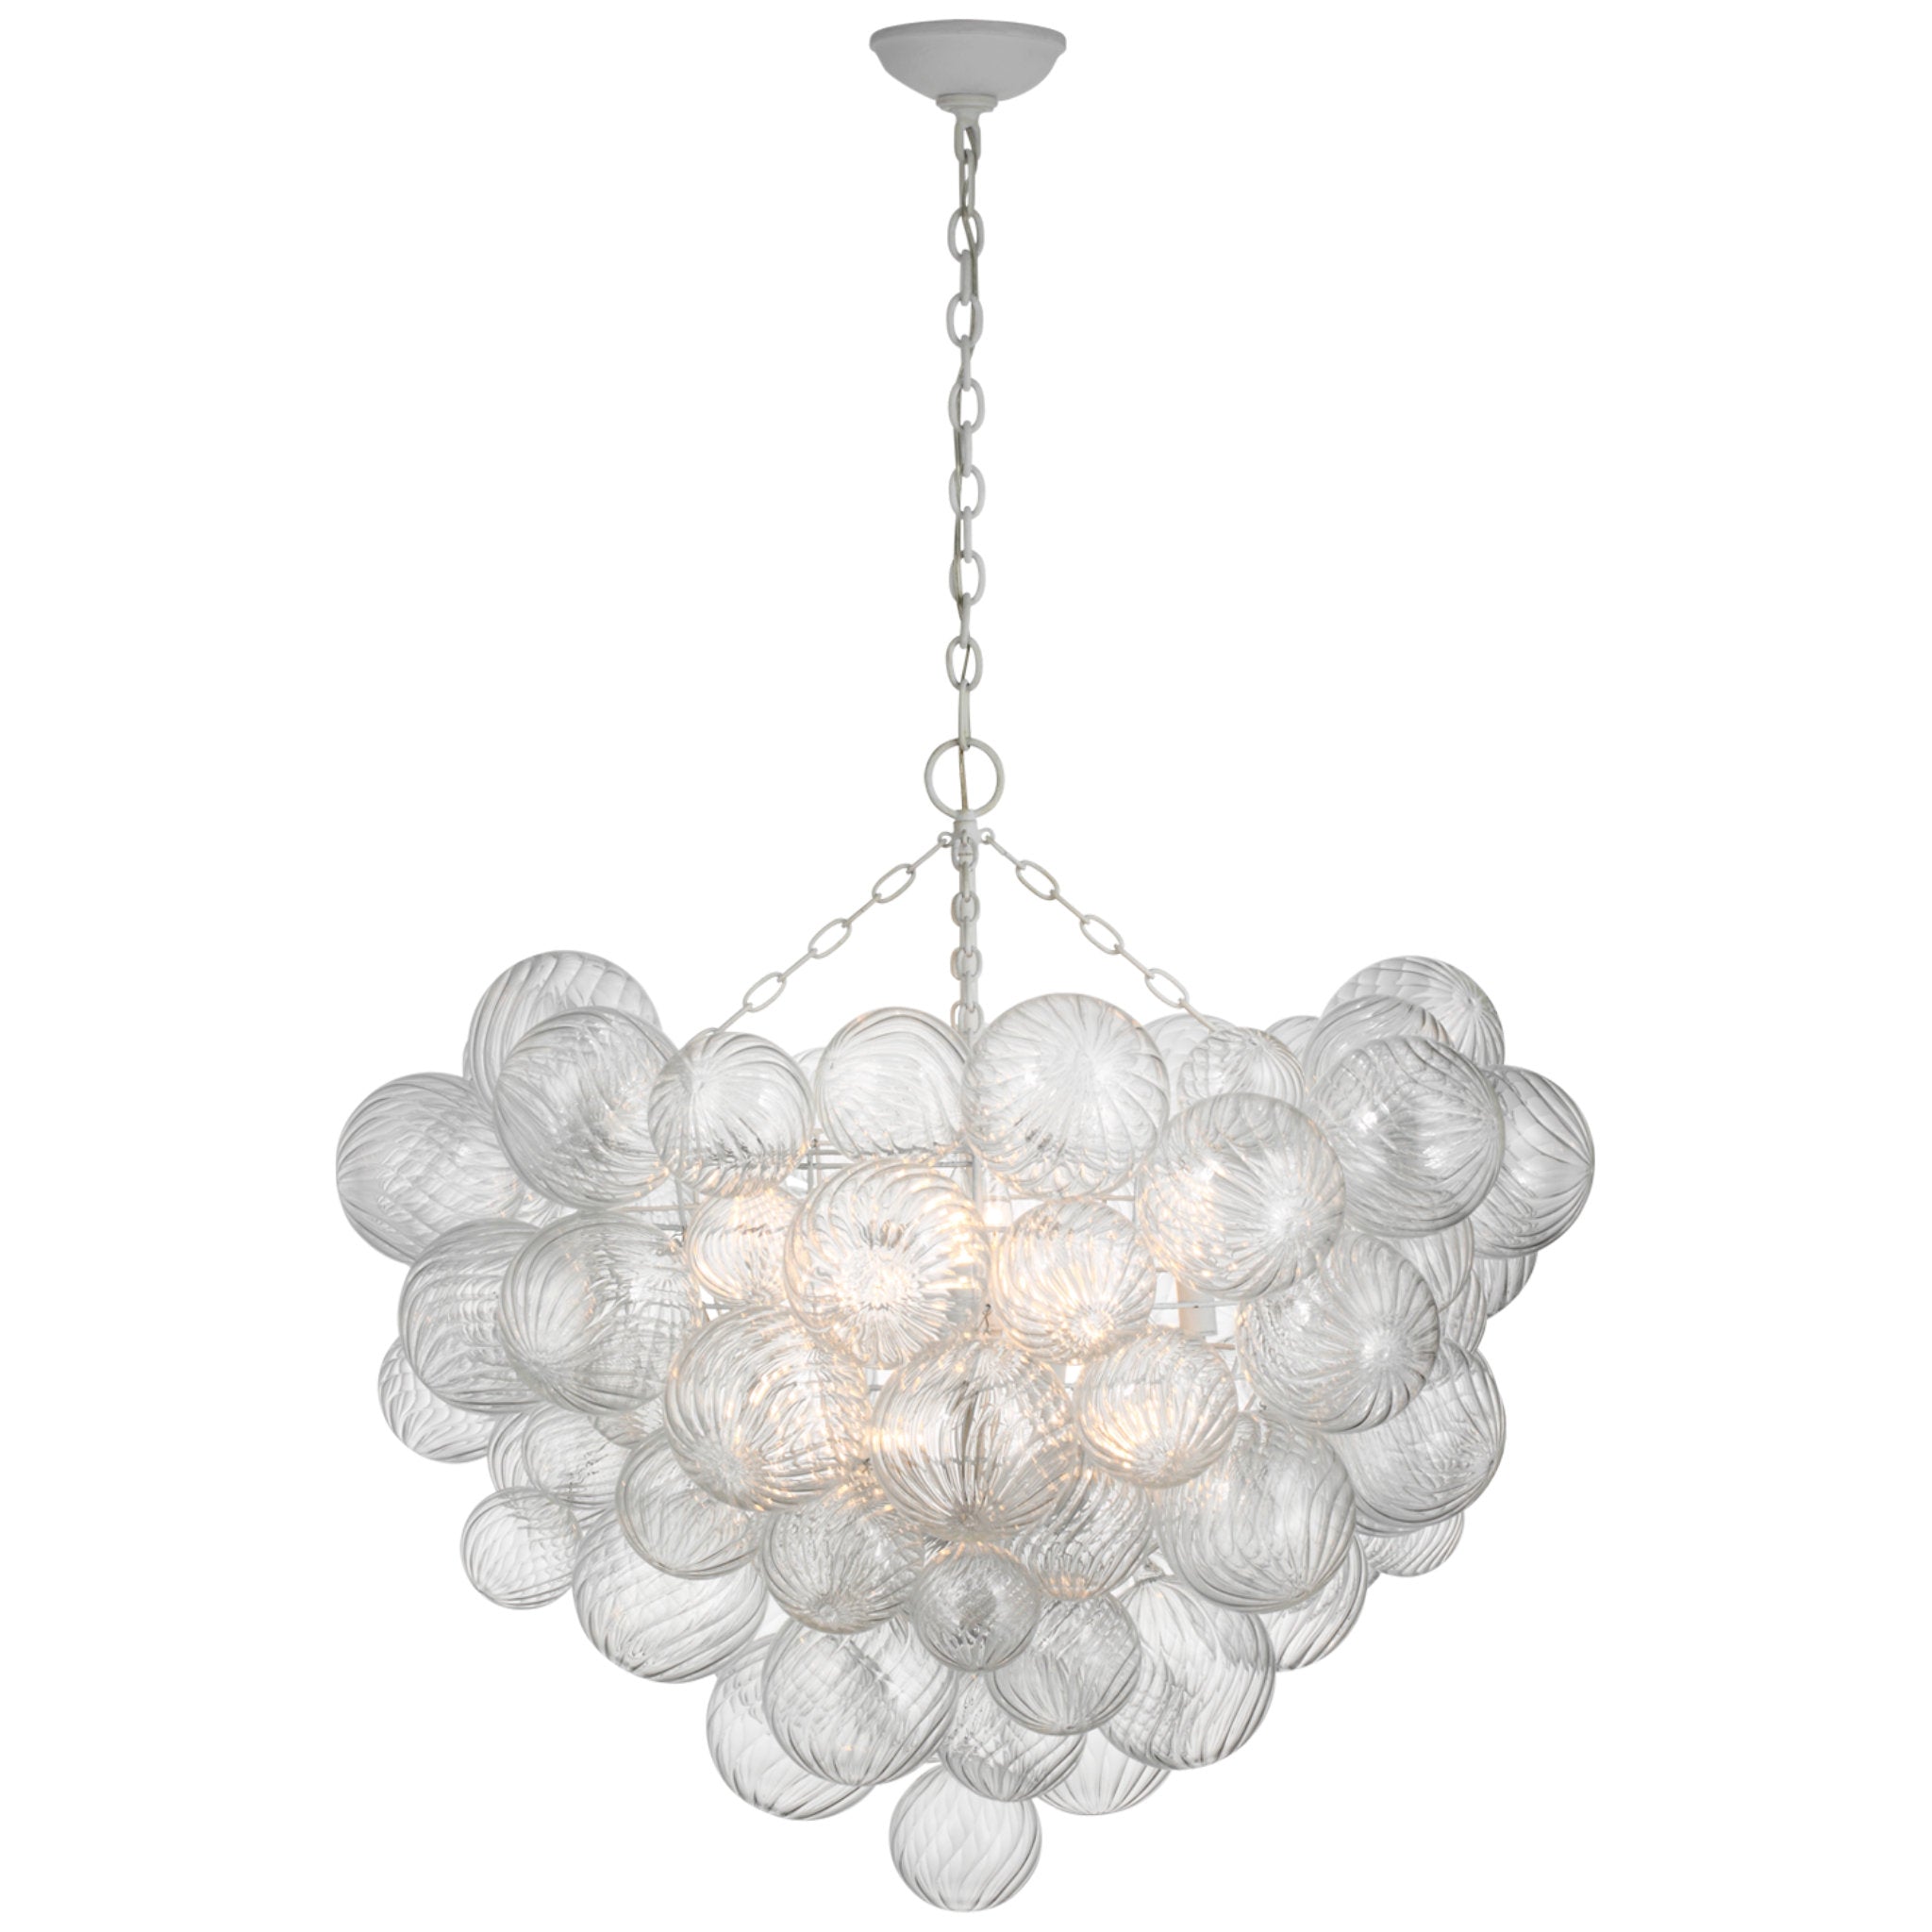 Julie Neill Talia Grande Chandelier in Plaster White with Clear Swirled Glass